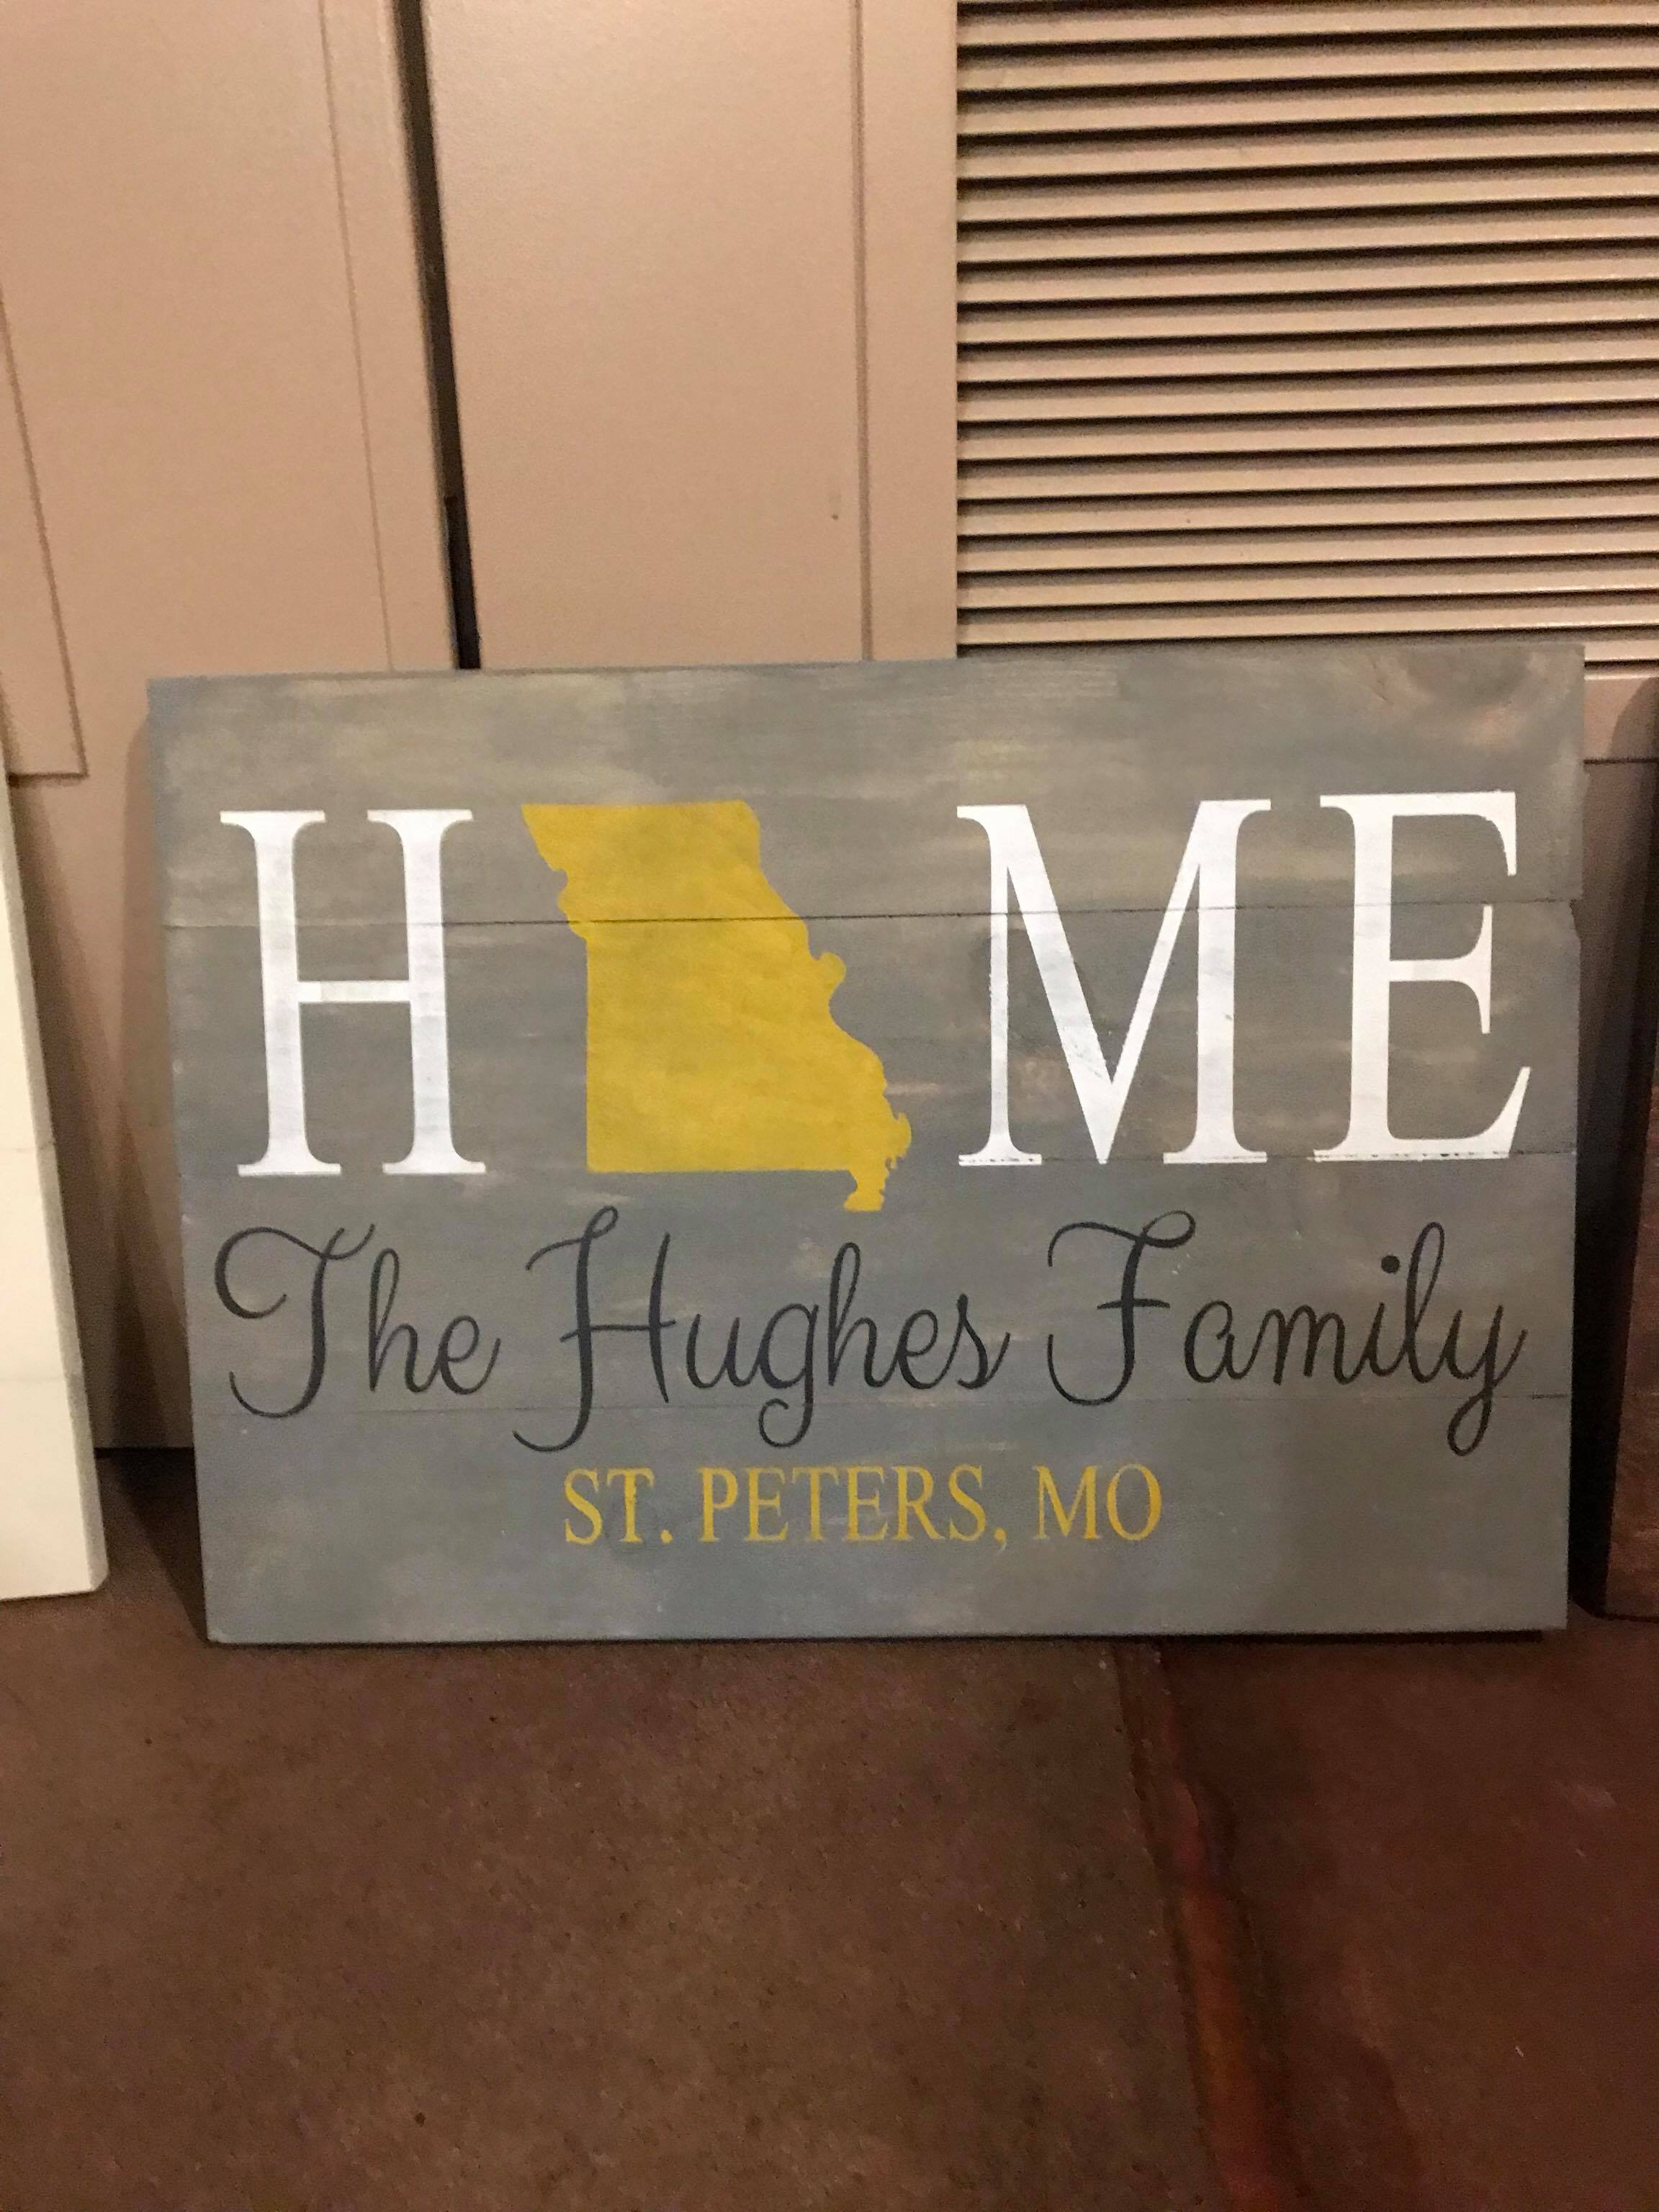 Home state-Family name and city